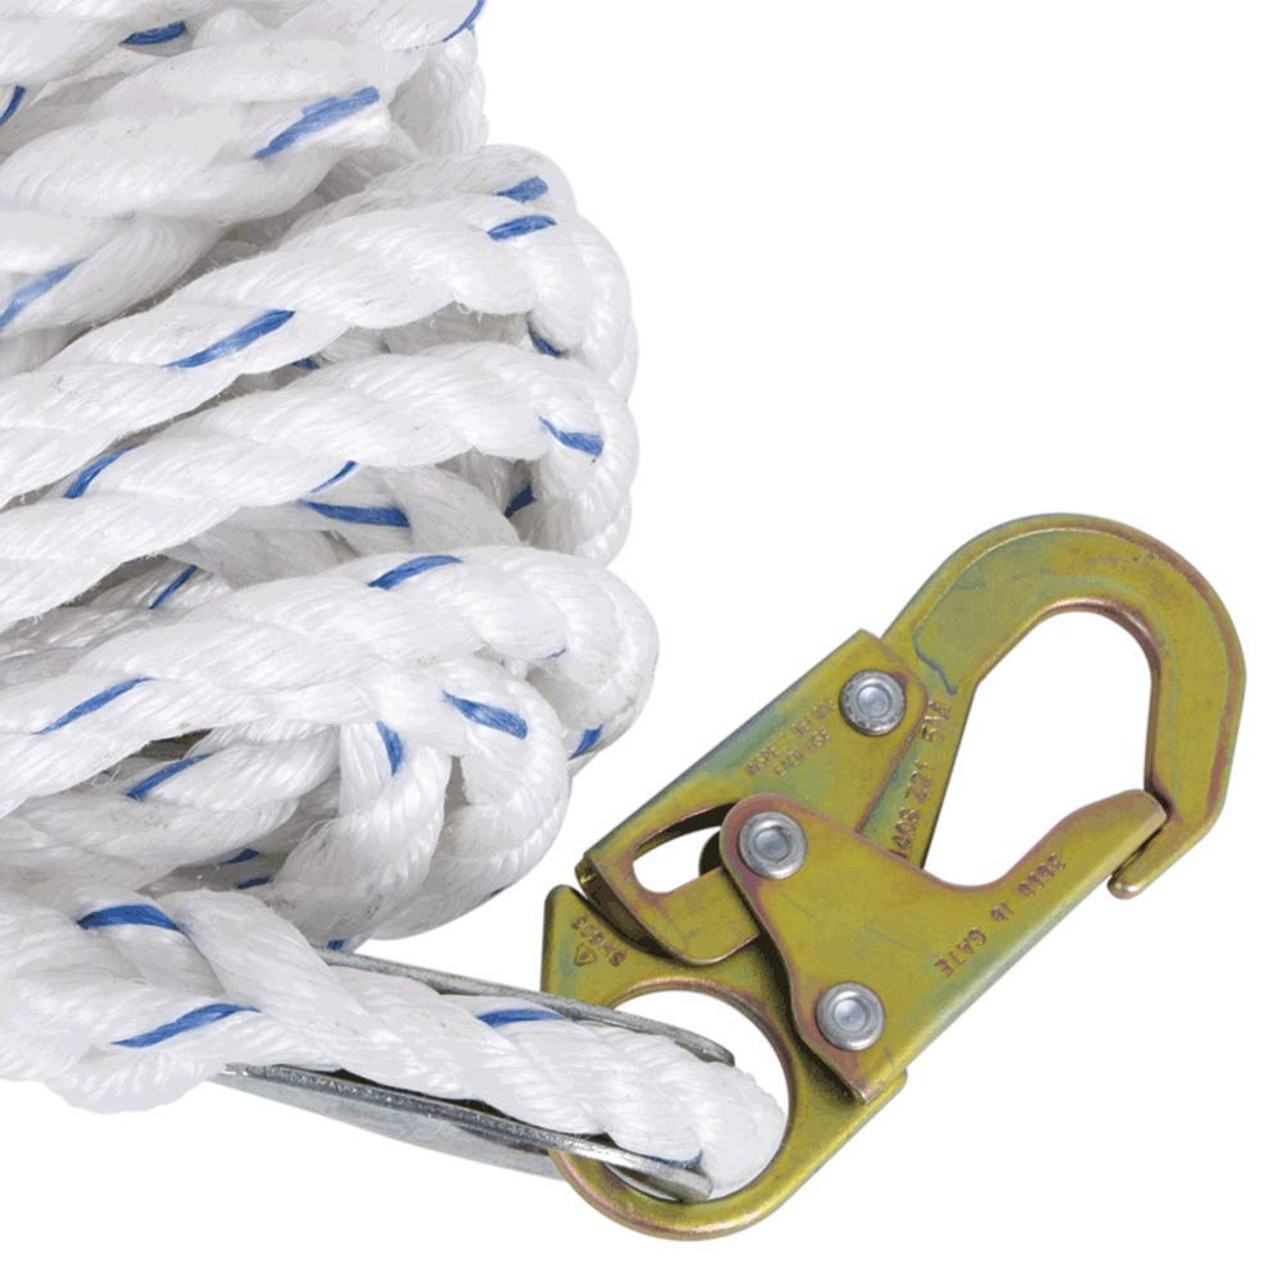 PeakWorks V84084150 Fall Protection Safety Rope Grab, XL 150 ft